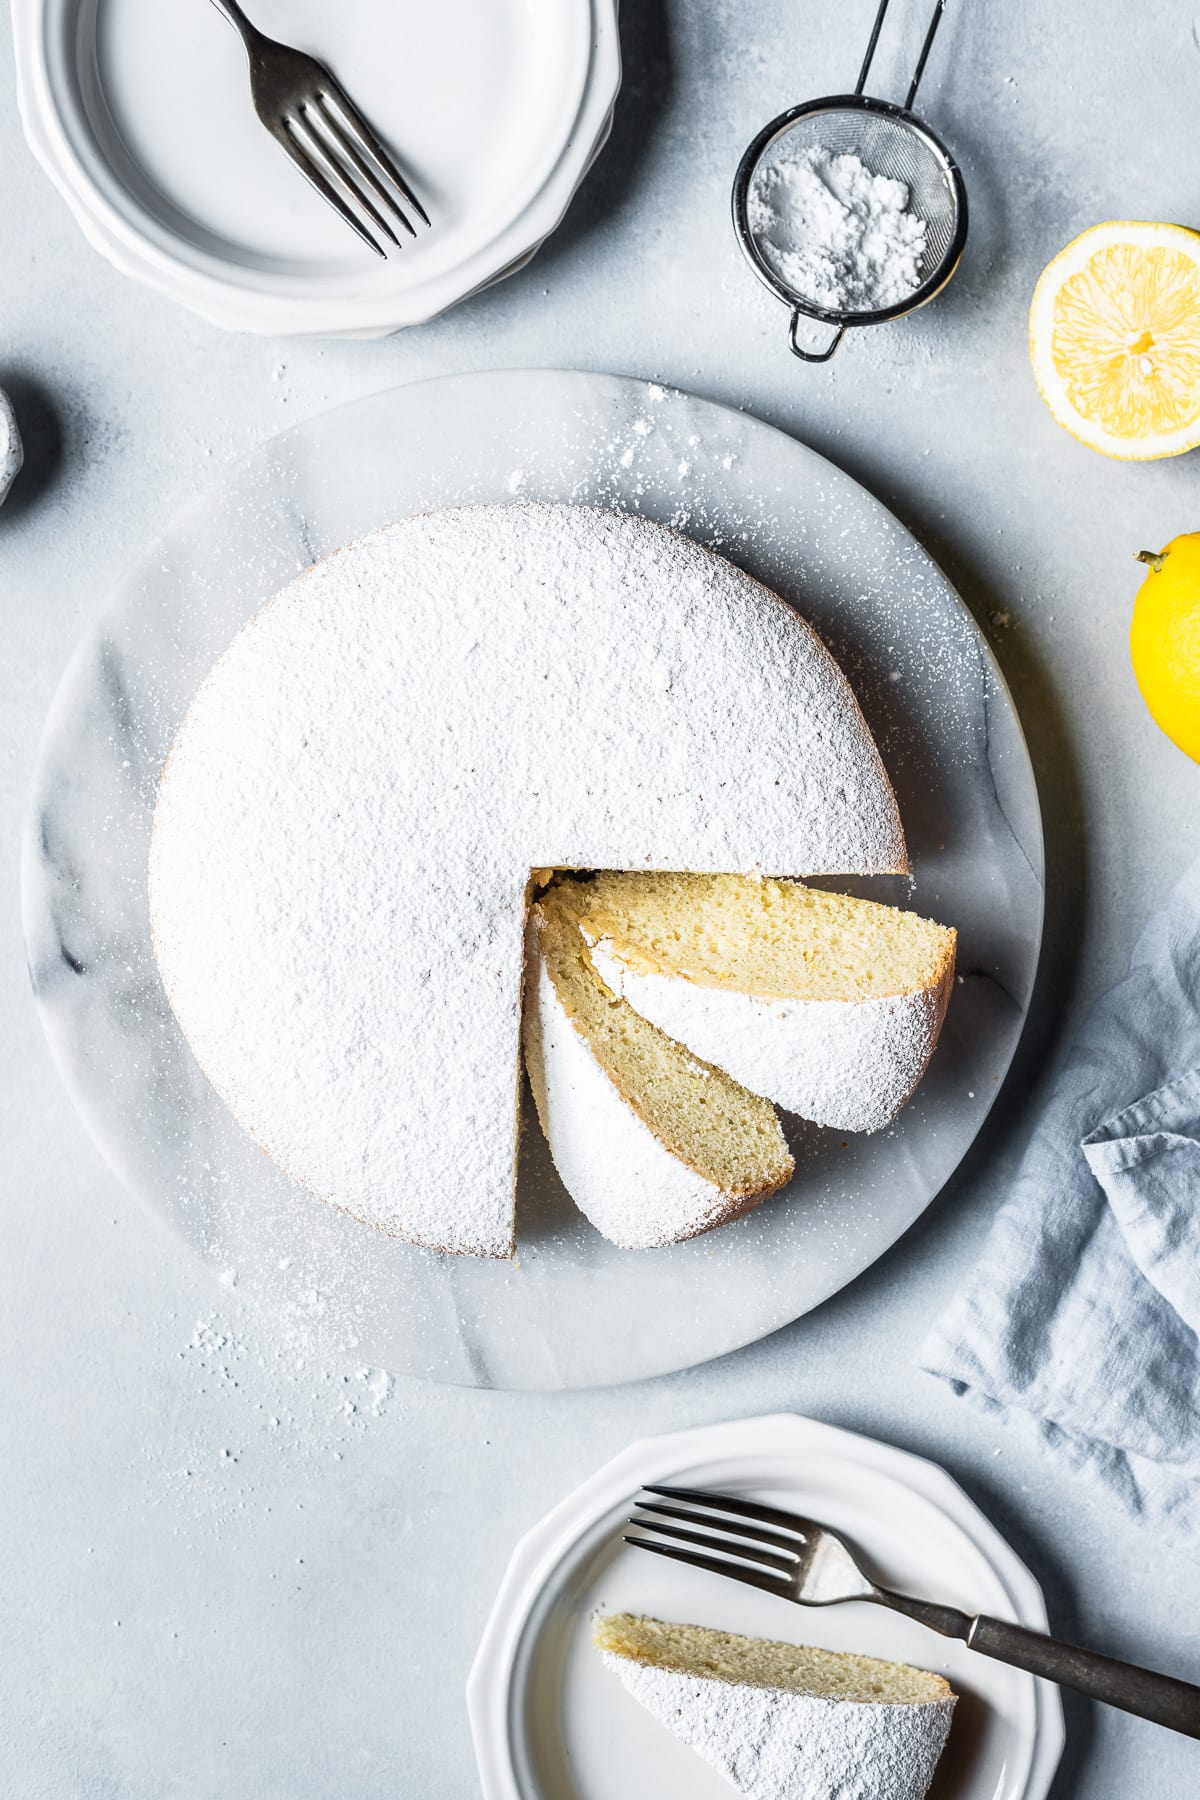 Top view of a pale yellow light and fluffy torta paradiso (paradise cake) covered in powdered sugar on a round marble platter. Two slices are turned at an angle, showing the fine pale yellow texture. A pale blue linen napkin rests nearby along with lemons.